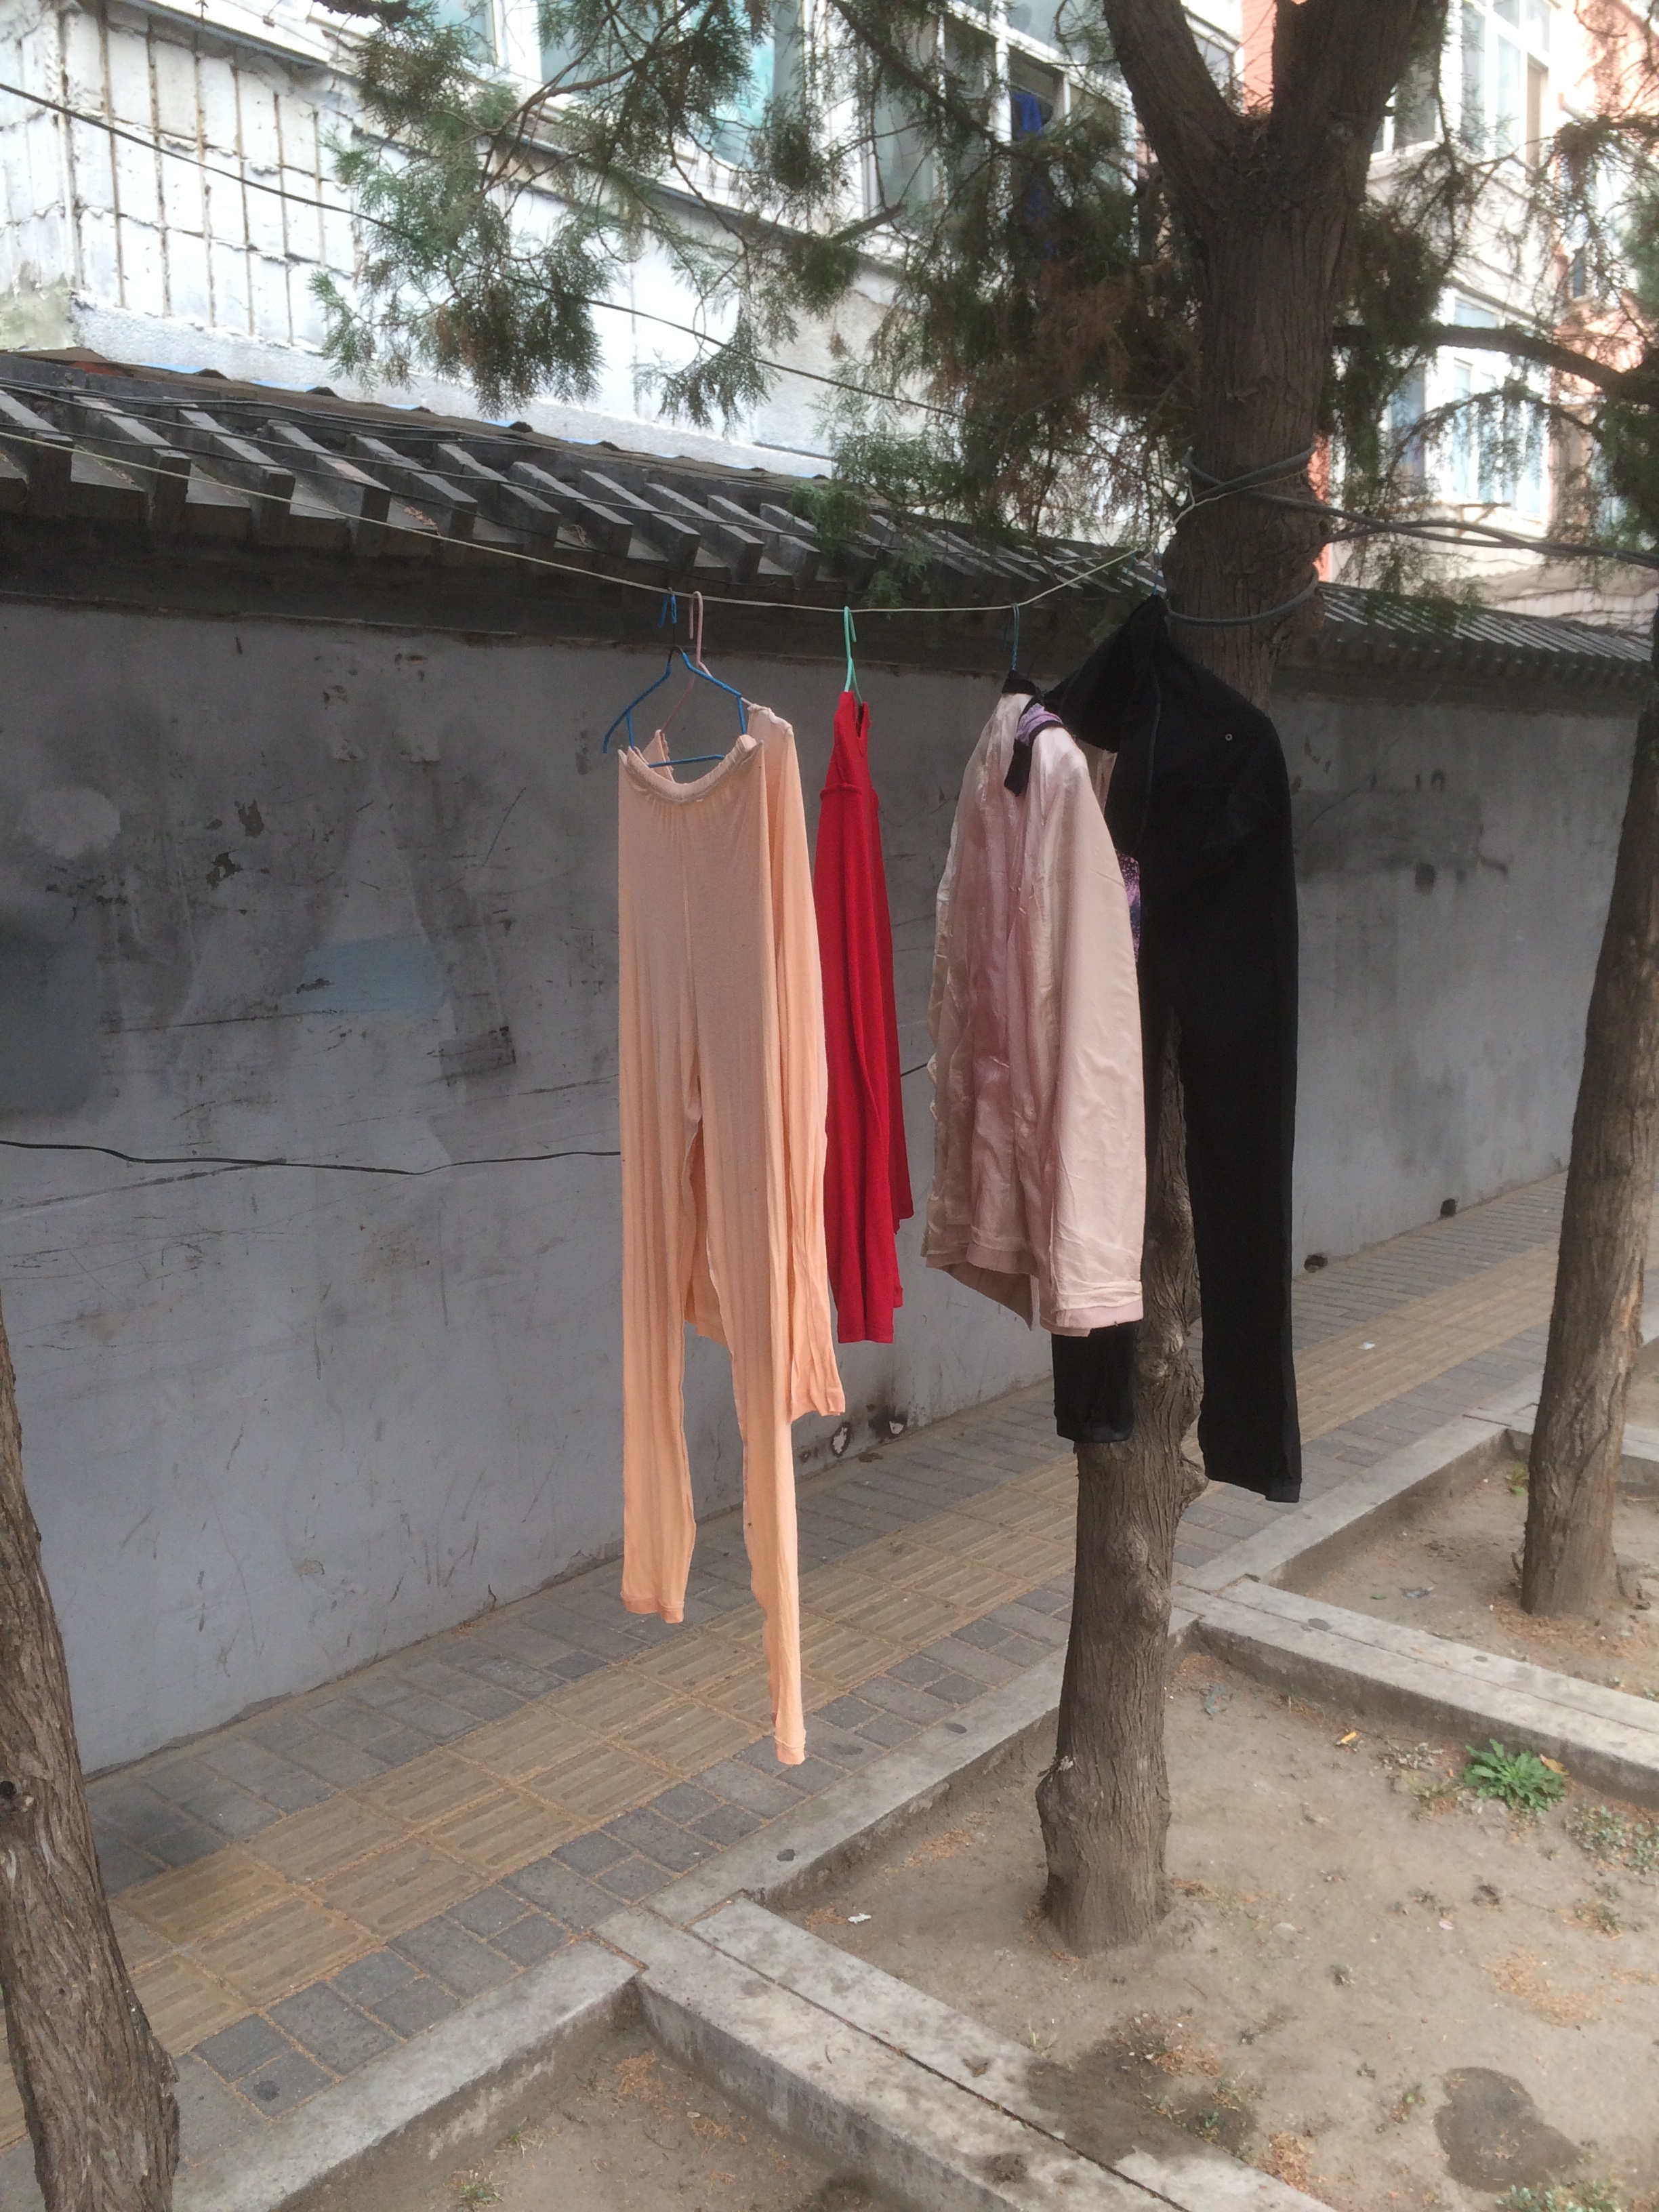  many people don't have dryers in their apartments...so I guess they just dry their clothes on the street?! 